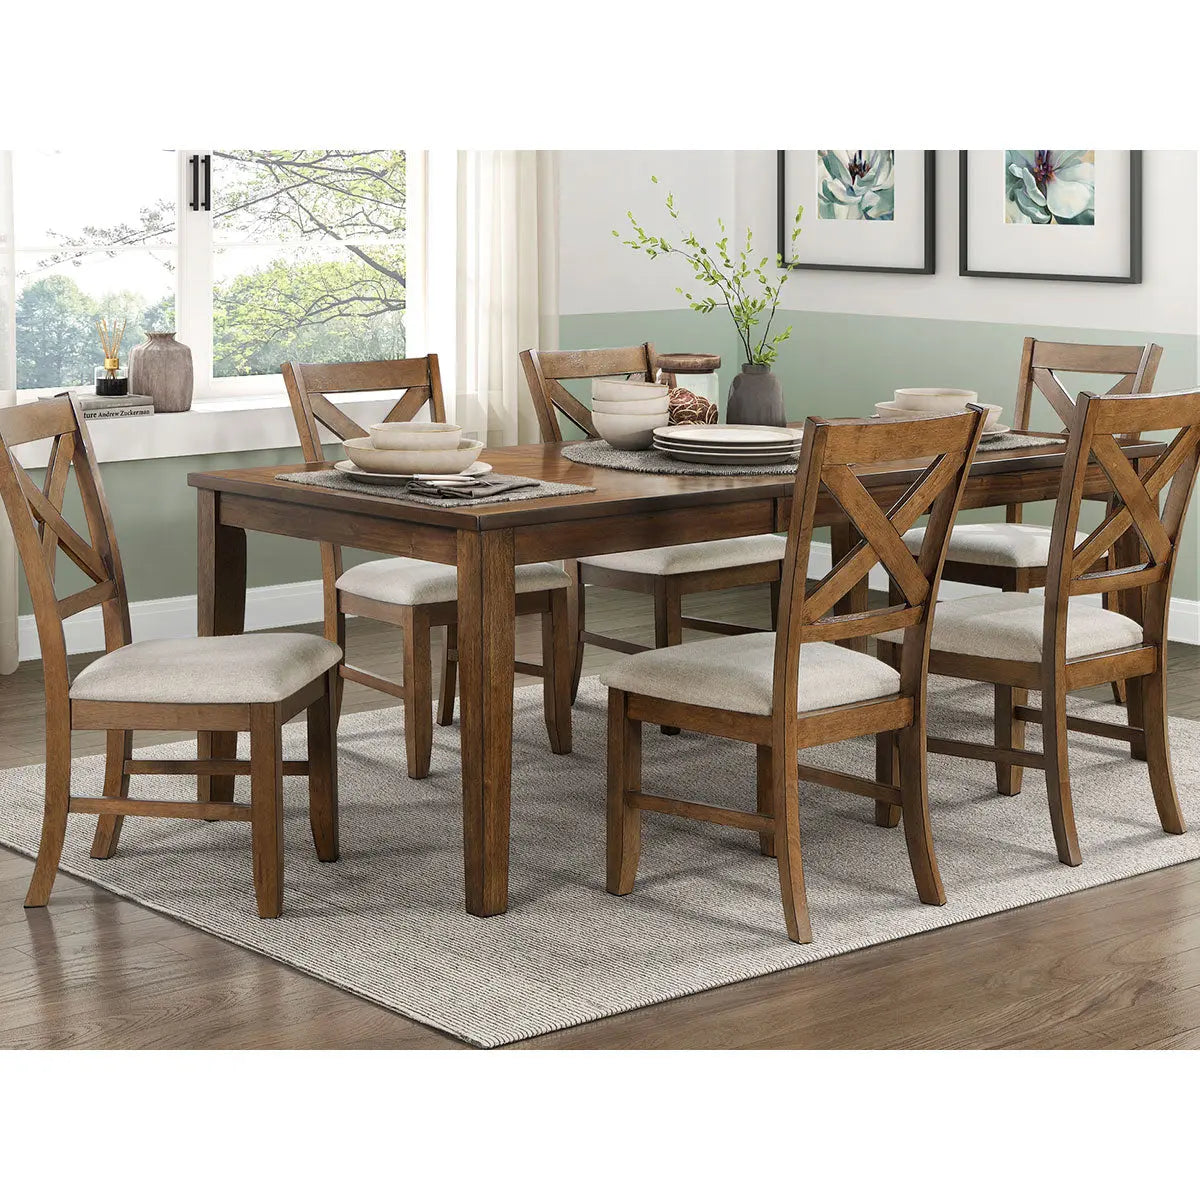 Counsil 7 pc Dining Set 5893 - Complete Home Furnish